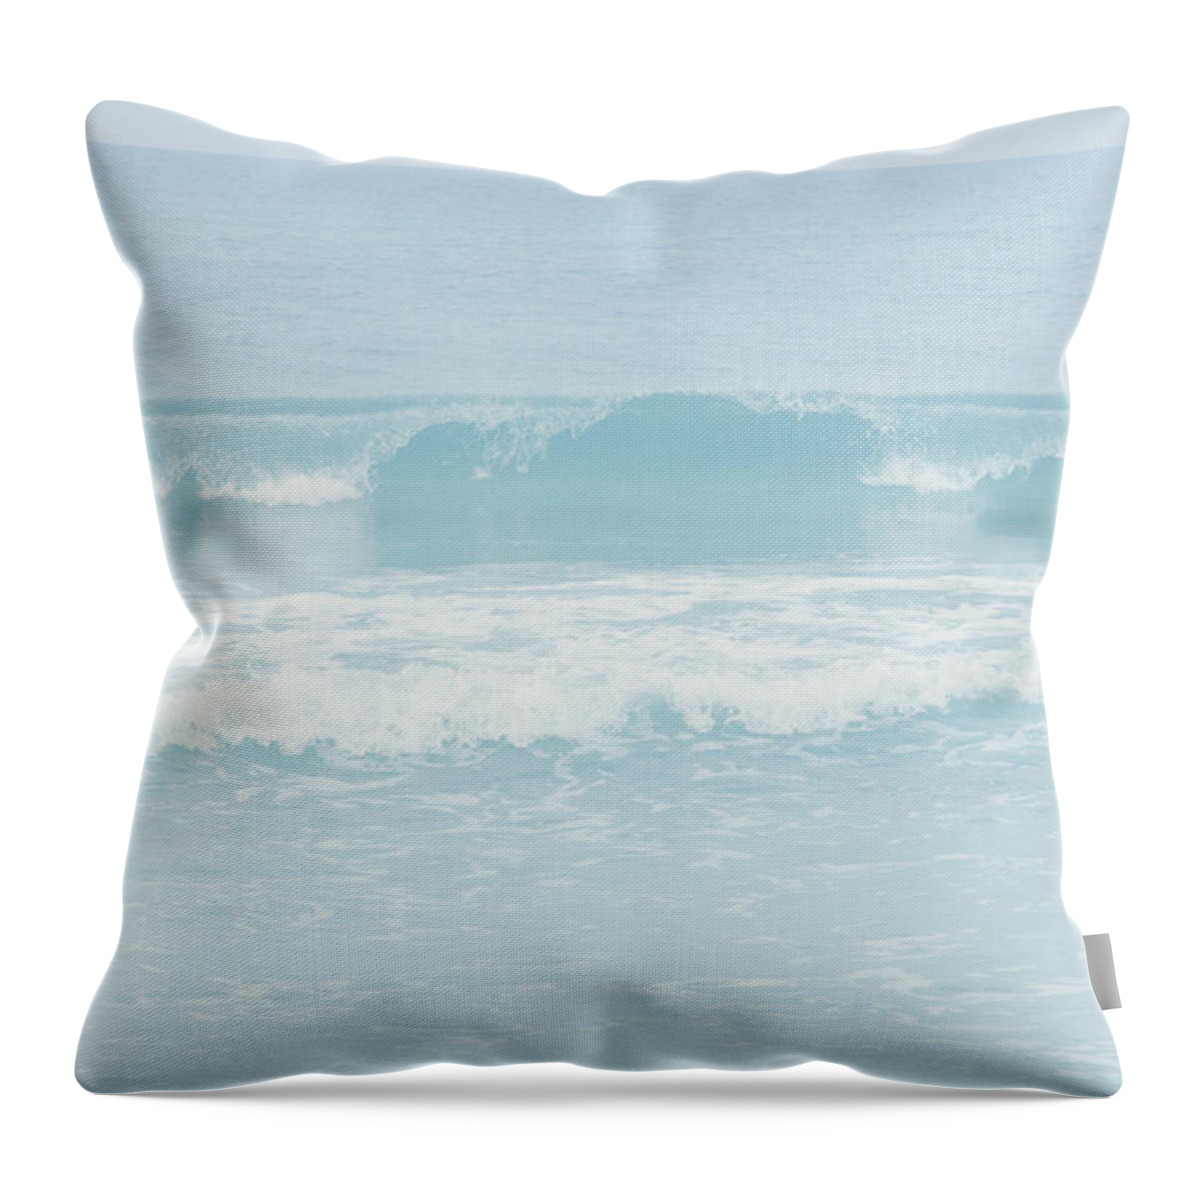 Ocean Throw Pillow featuring the photograph Whisper to me by Toni Hopper